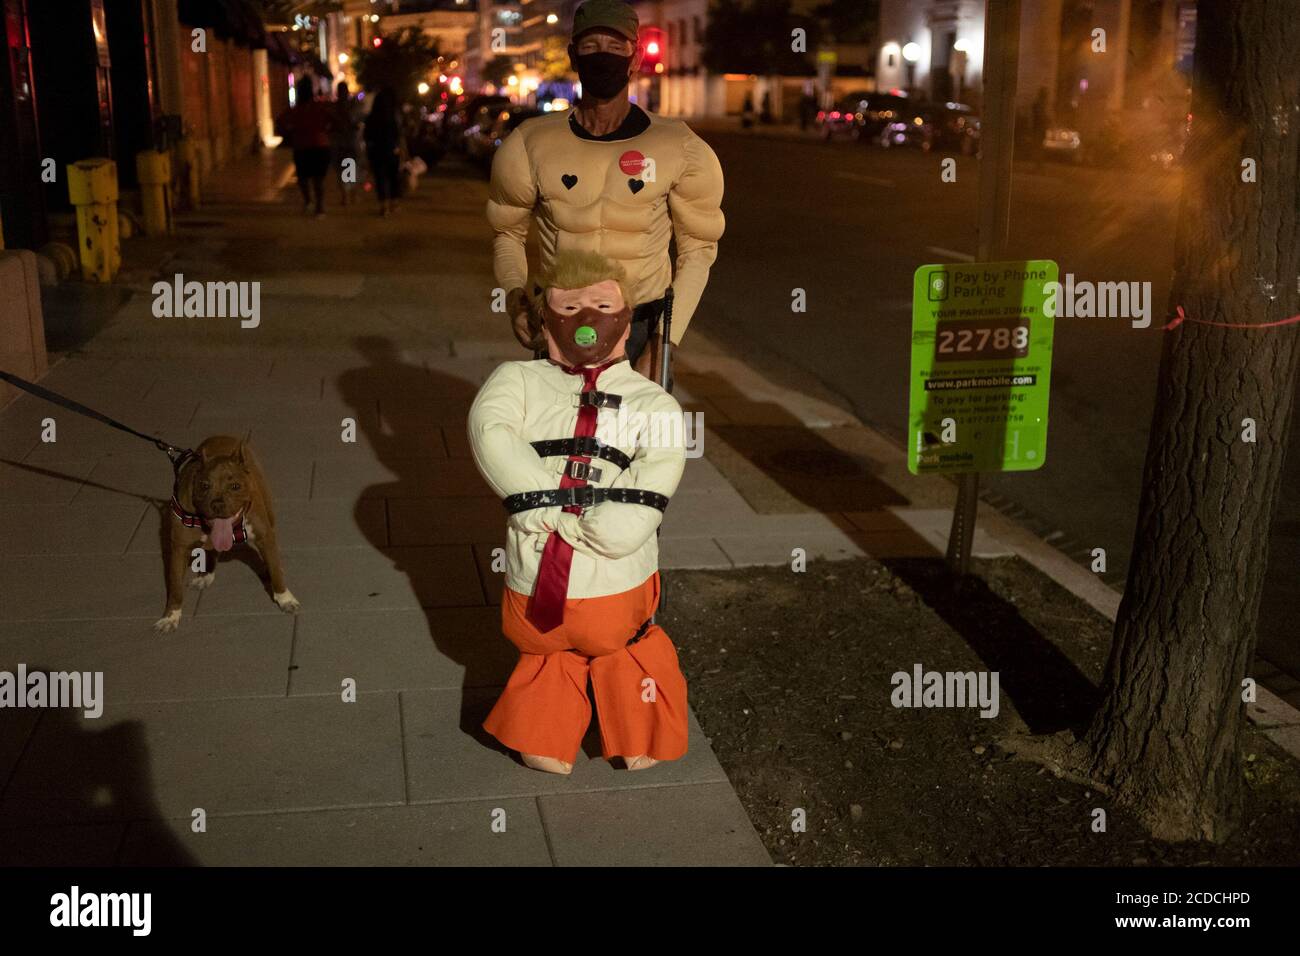 Washington DC, USA. August 27, 2020: A Protestor appears in a Putin costume  and and Trump Hannibal Lecter costume during a Black Lives Matter  demonstration in Washington, DC. The crowed was protesting